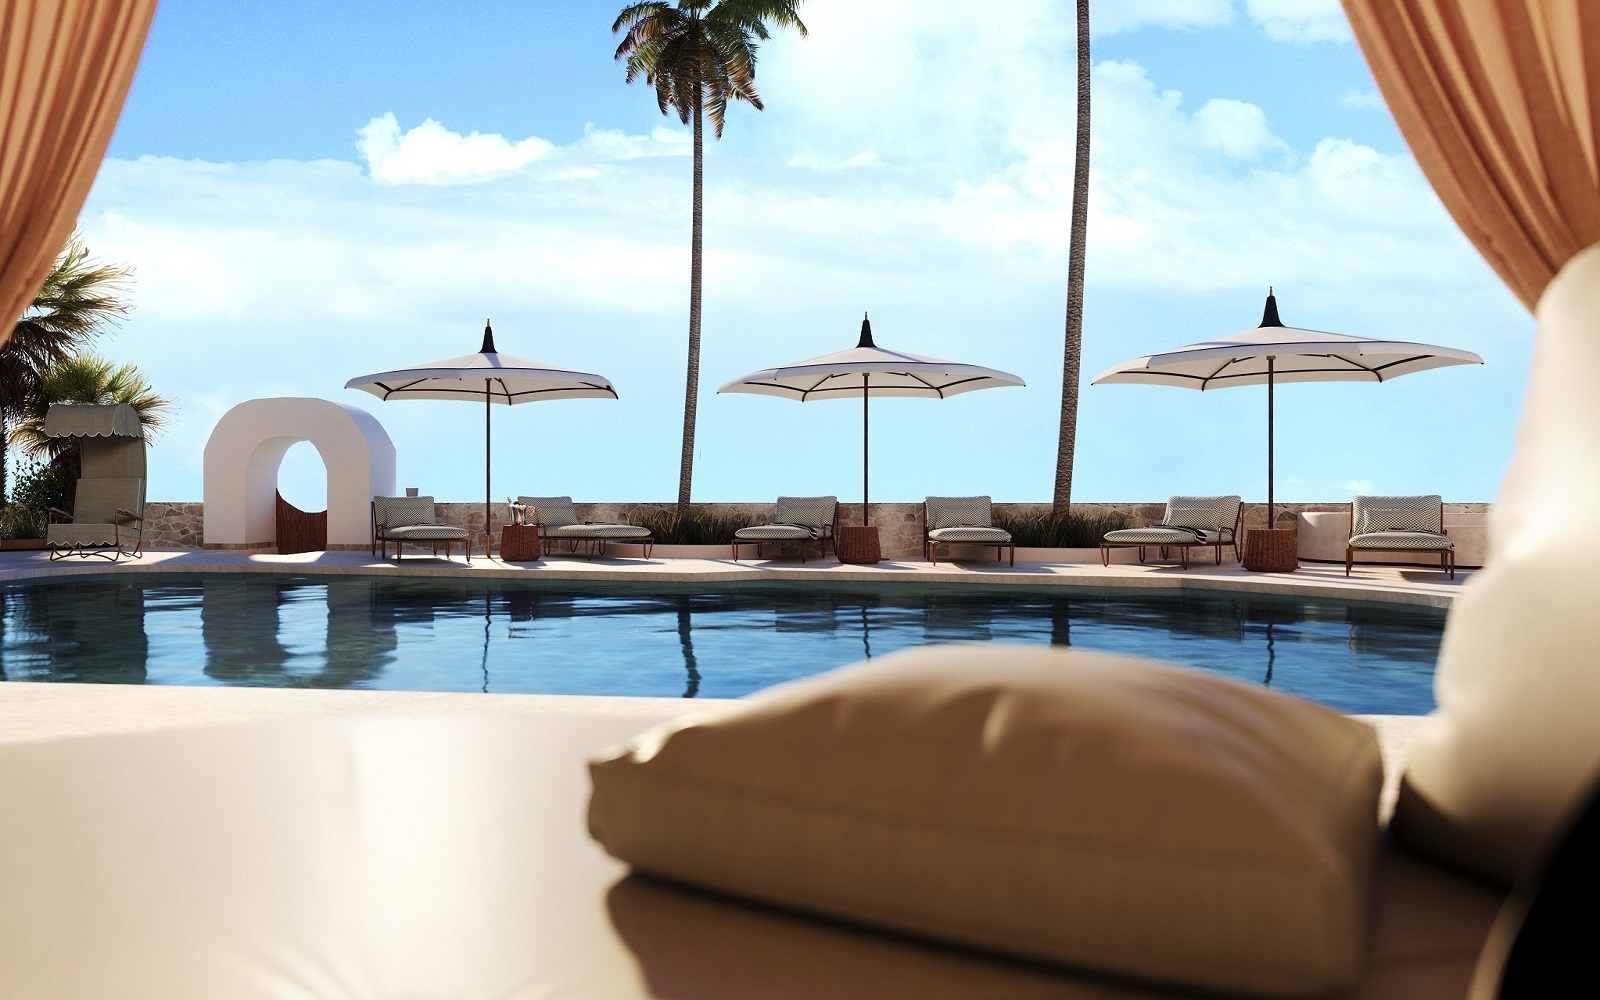 view from cushioned seating across pool to umbrellas and views across Ibiza